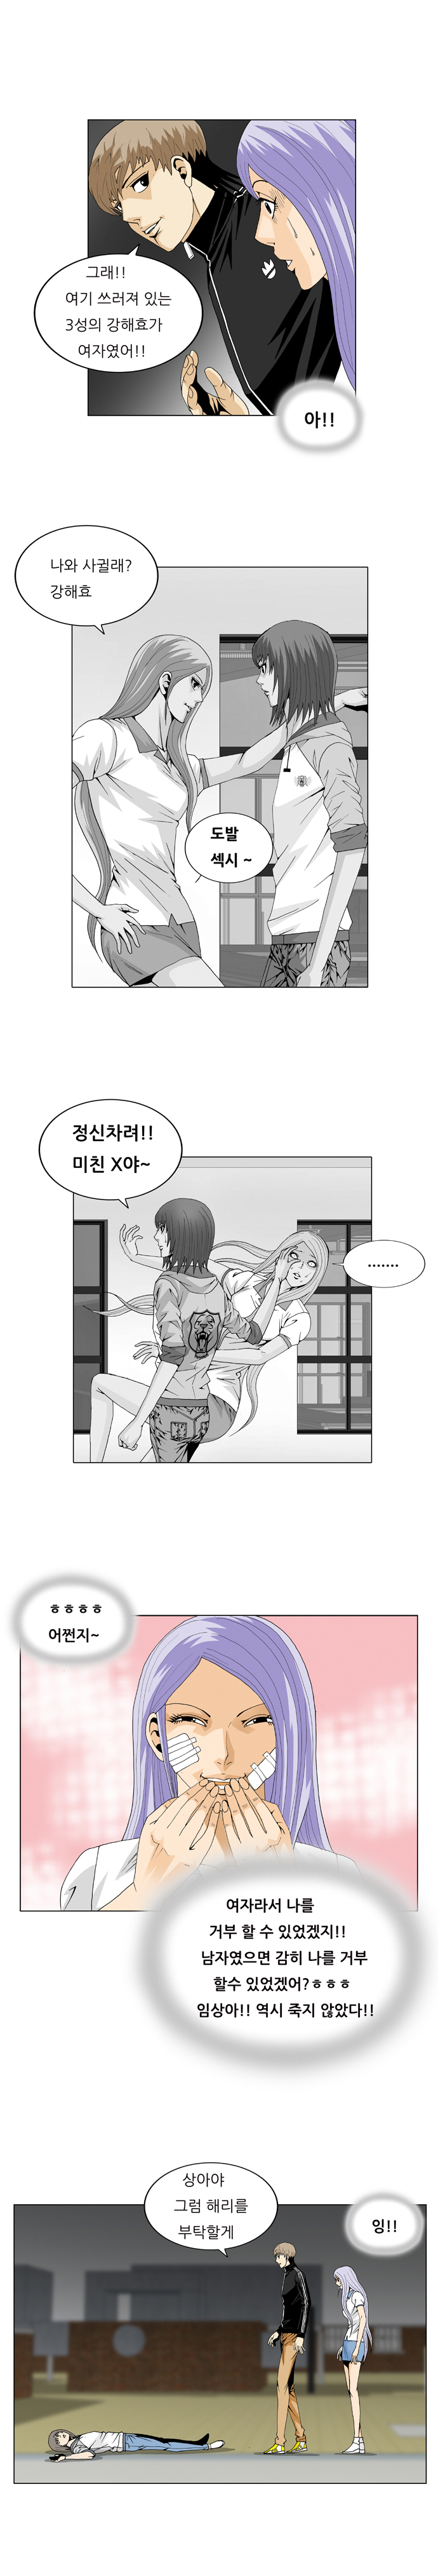 Ultimate Legend - Kang Hae Hyo - Chapter 36 - Page 3